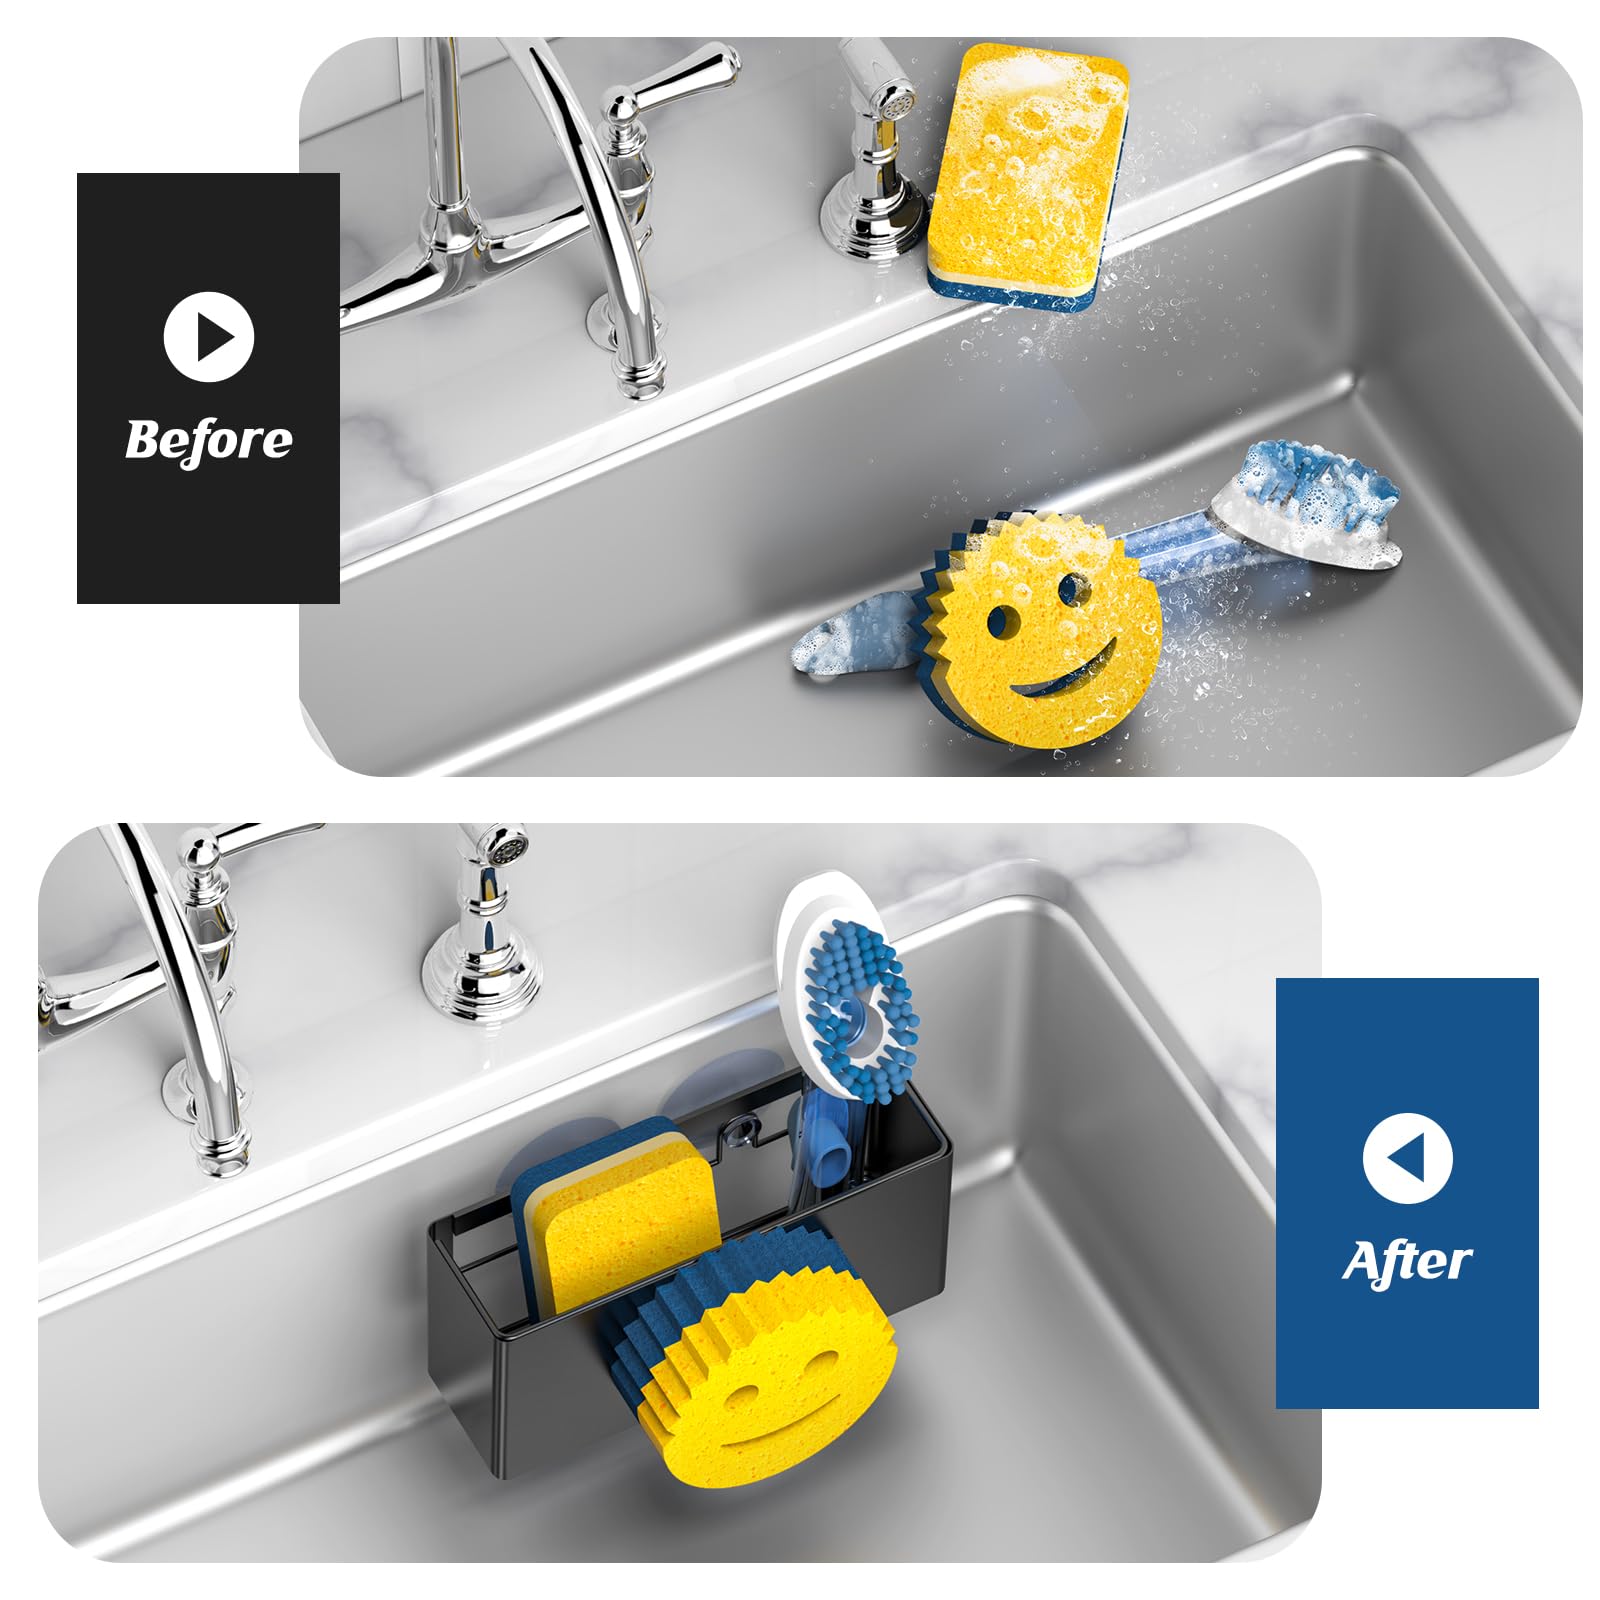 Utobao Sponge Holder, Smiley Face Kitchen Sink Caddy for Kitchen Sink, Sink Brush Holder for Holding Smiling Face Scrubber, Soap, Dish Brush,2 Installation Ways (Suction Cups & Adhesive Hook)-Black